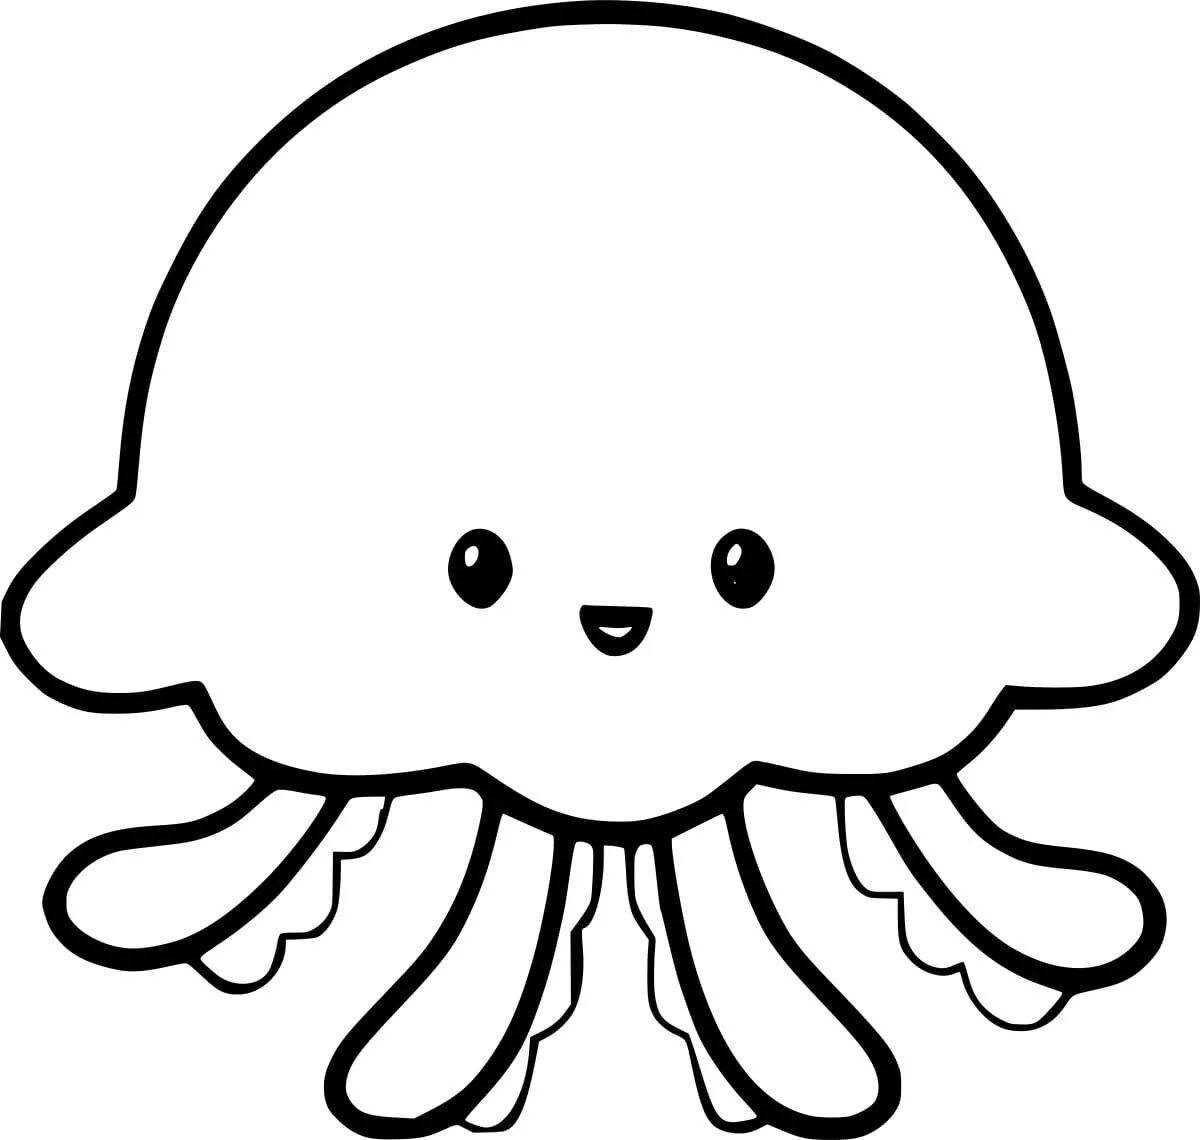 Bright jellyfish coloring book for kids